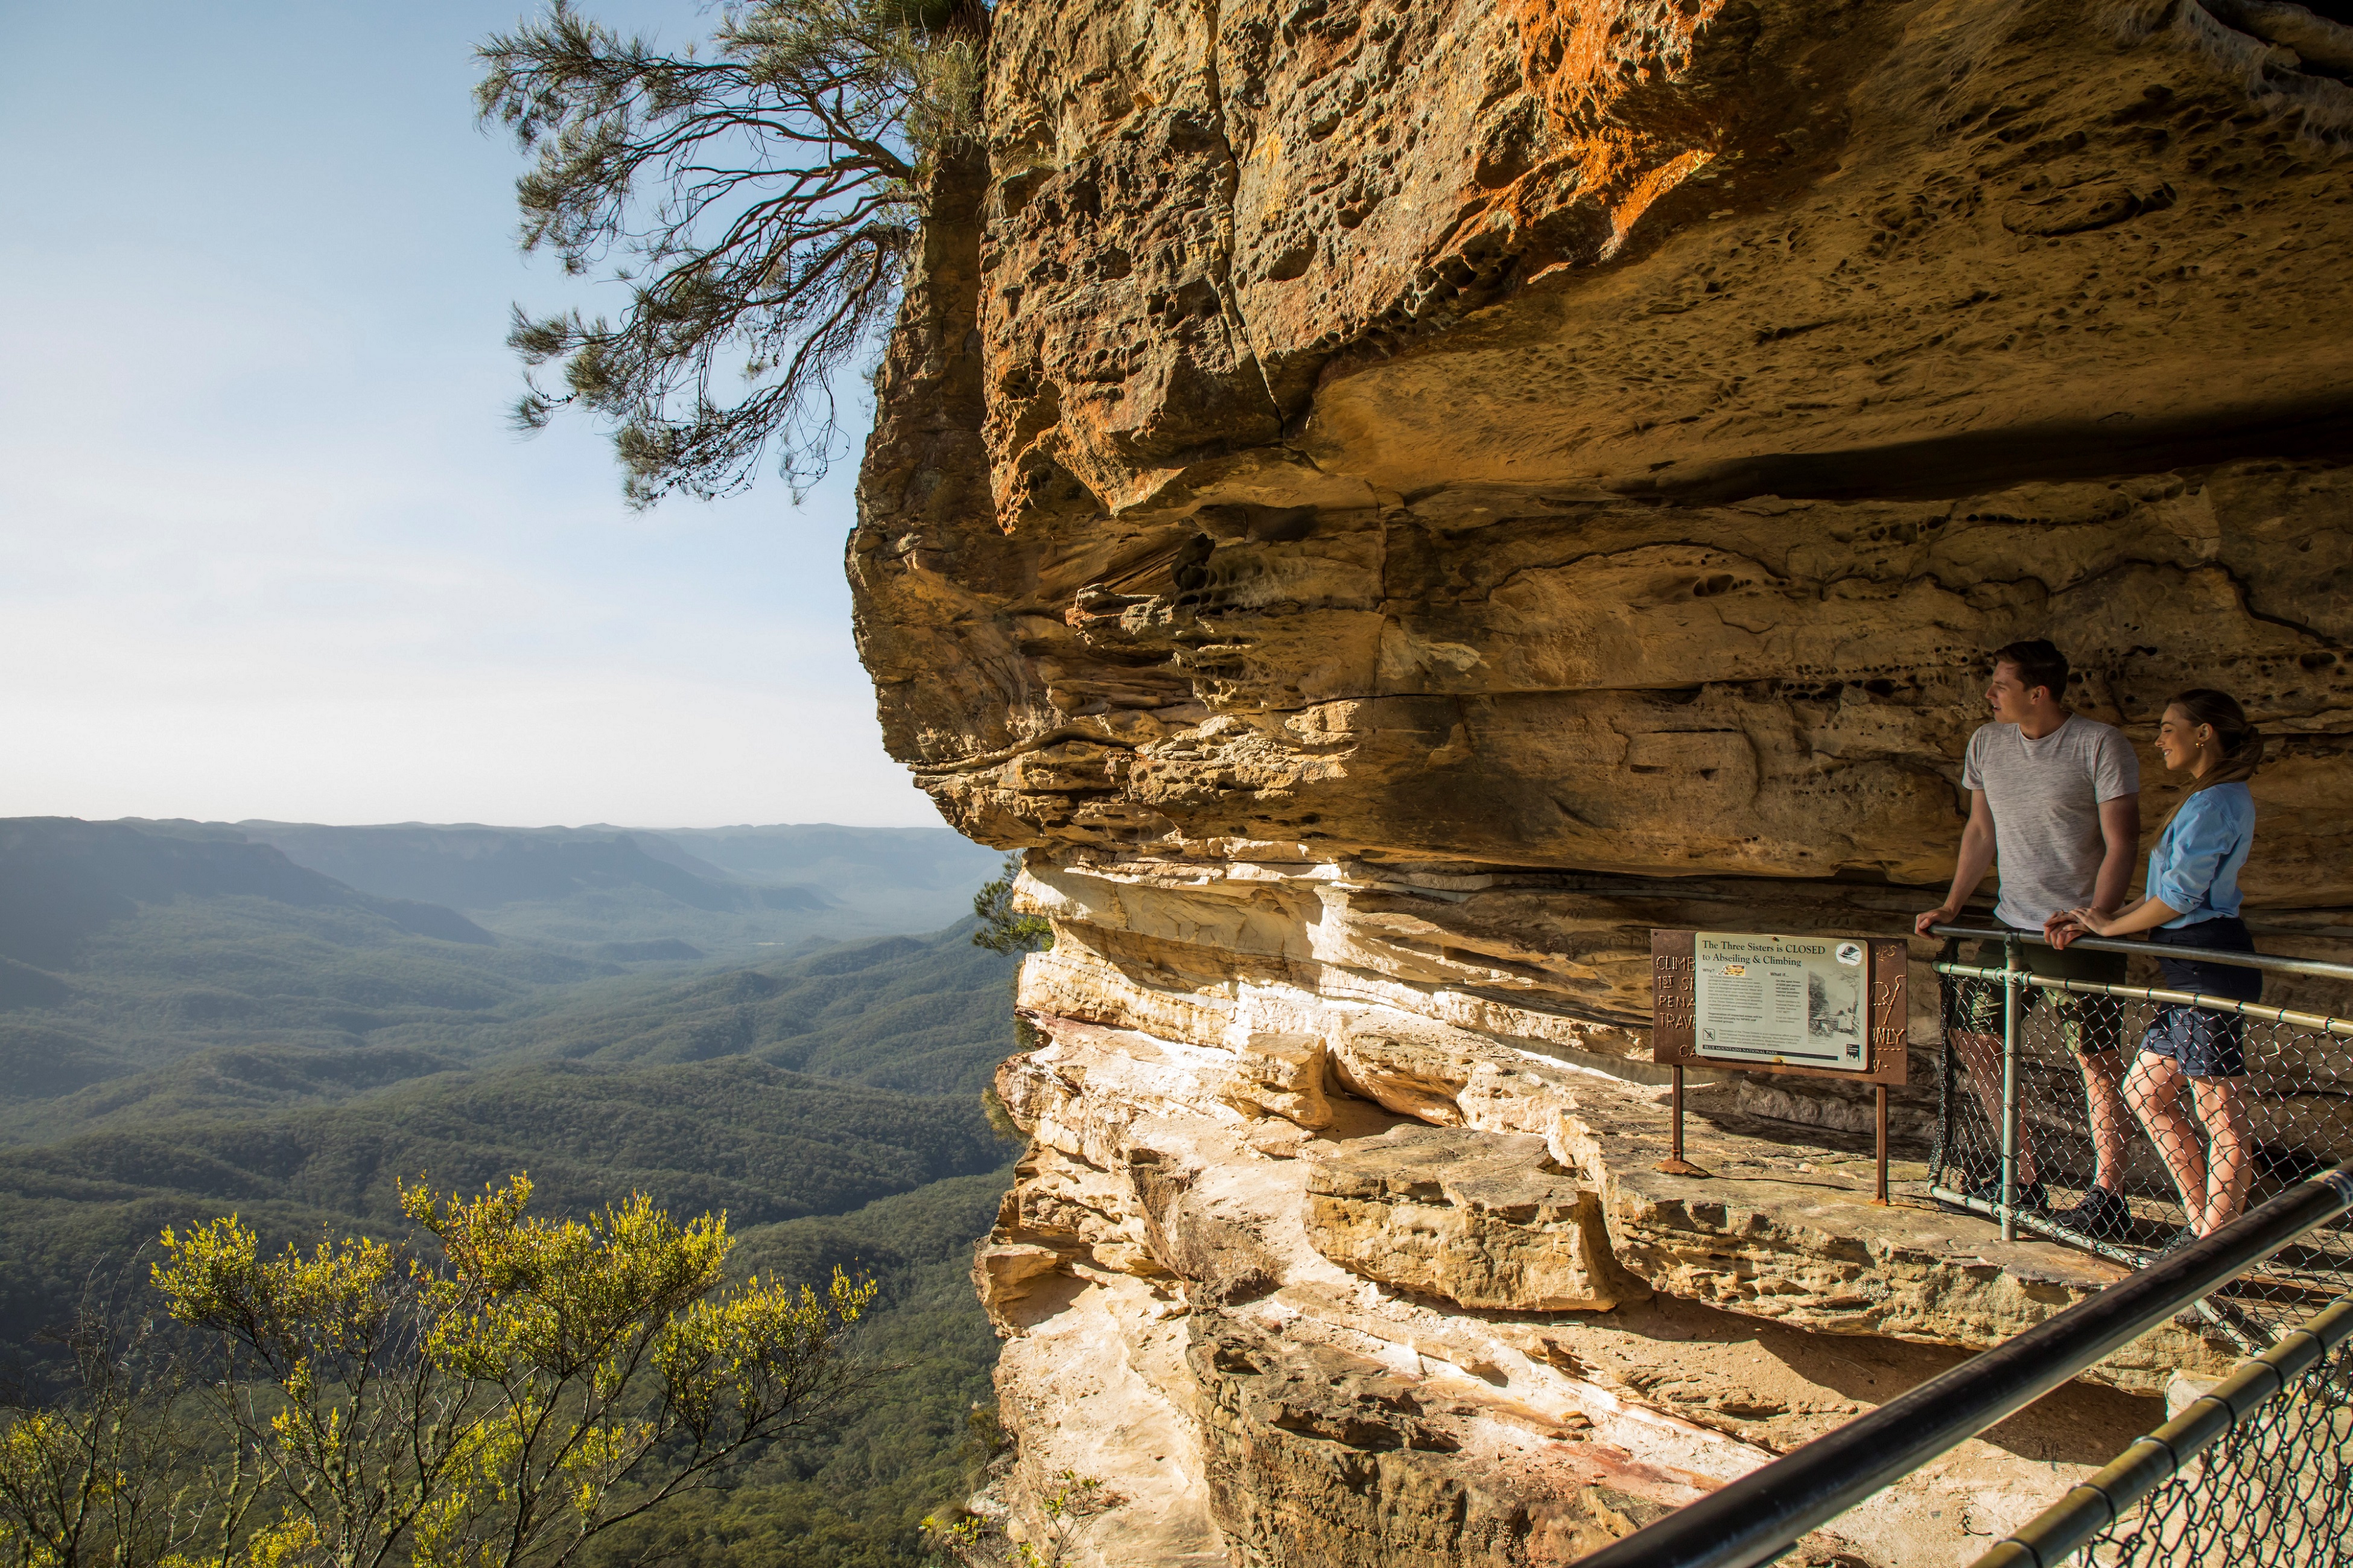 Blue Mountains Sunset and Wilderness Tour | Without the crowds